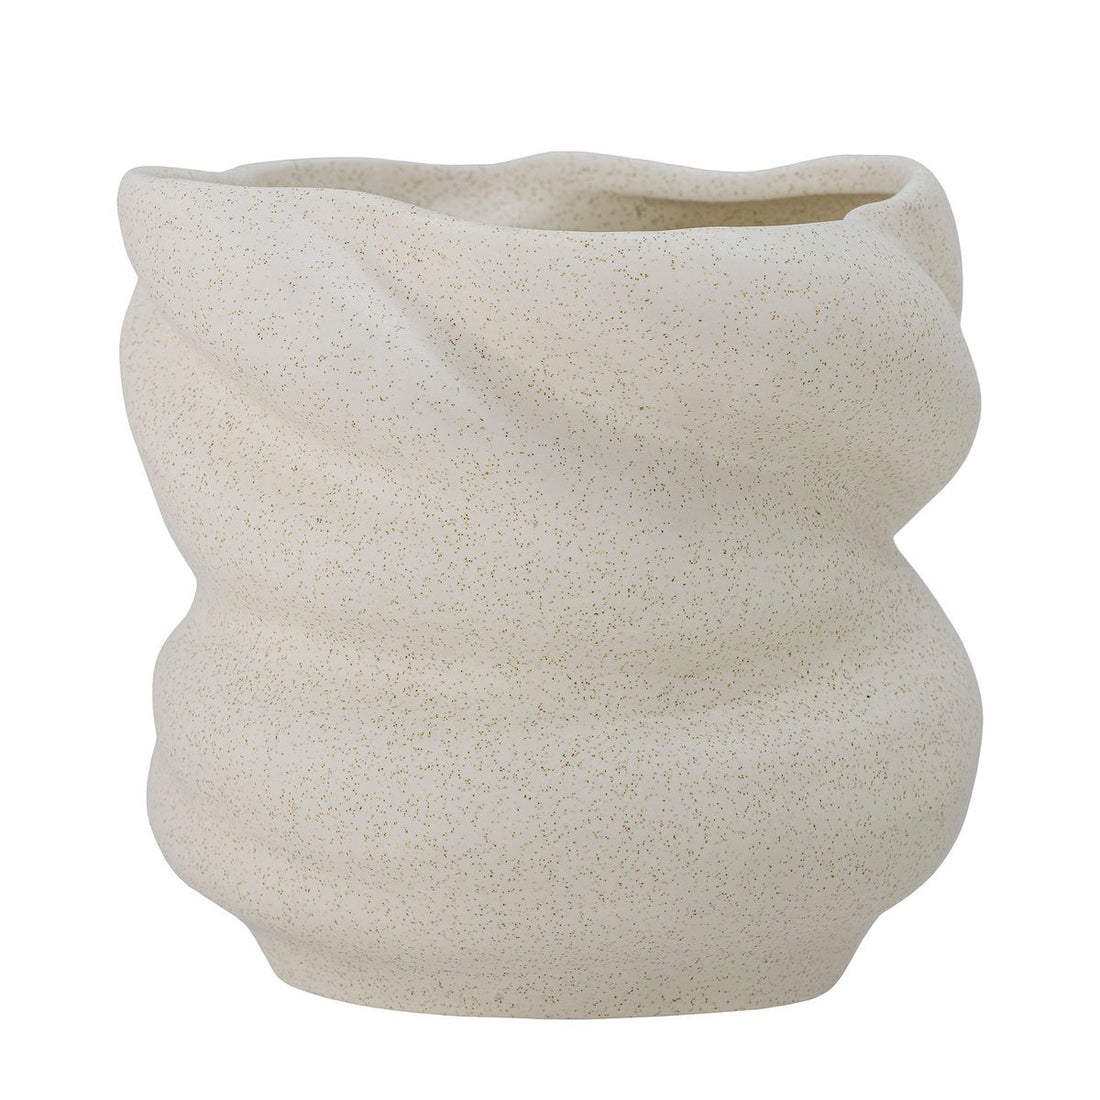 Bloomingville Orana Herbal Potted Hides, White, Stoneware